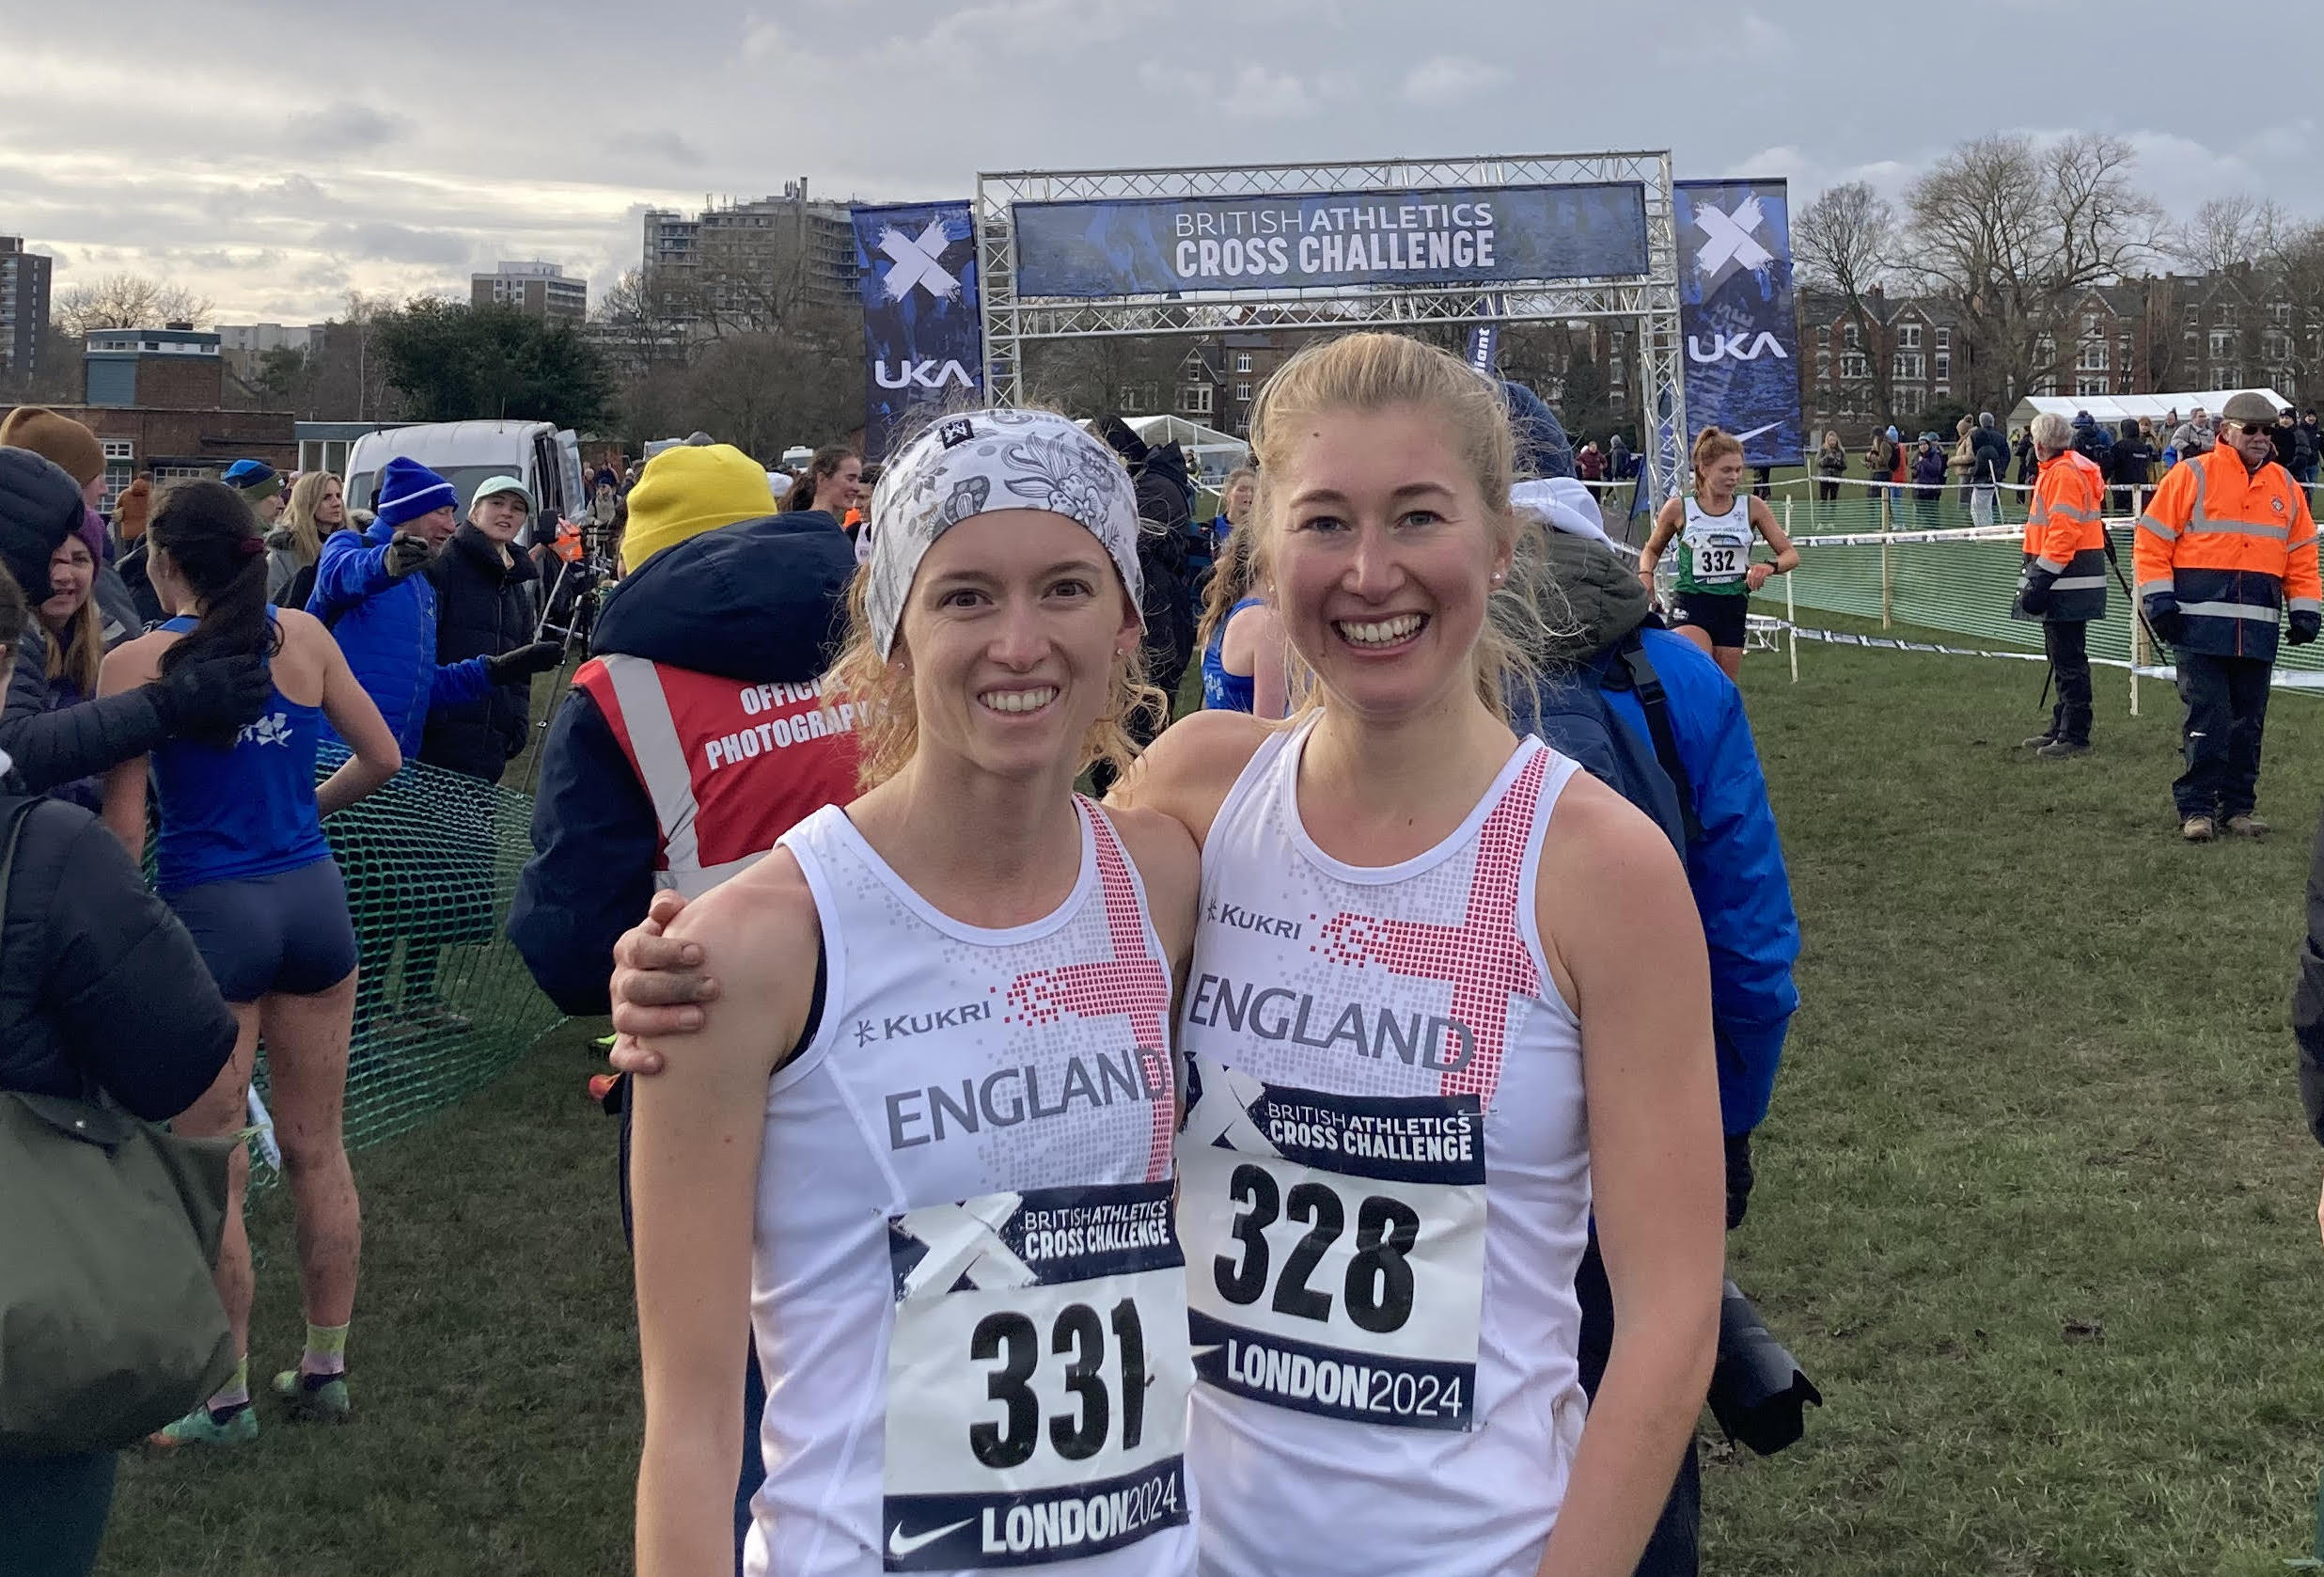 L to R Ellie Wallace and Phoebe Barker who finishes 4th and 5th respectively